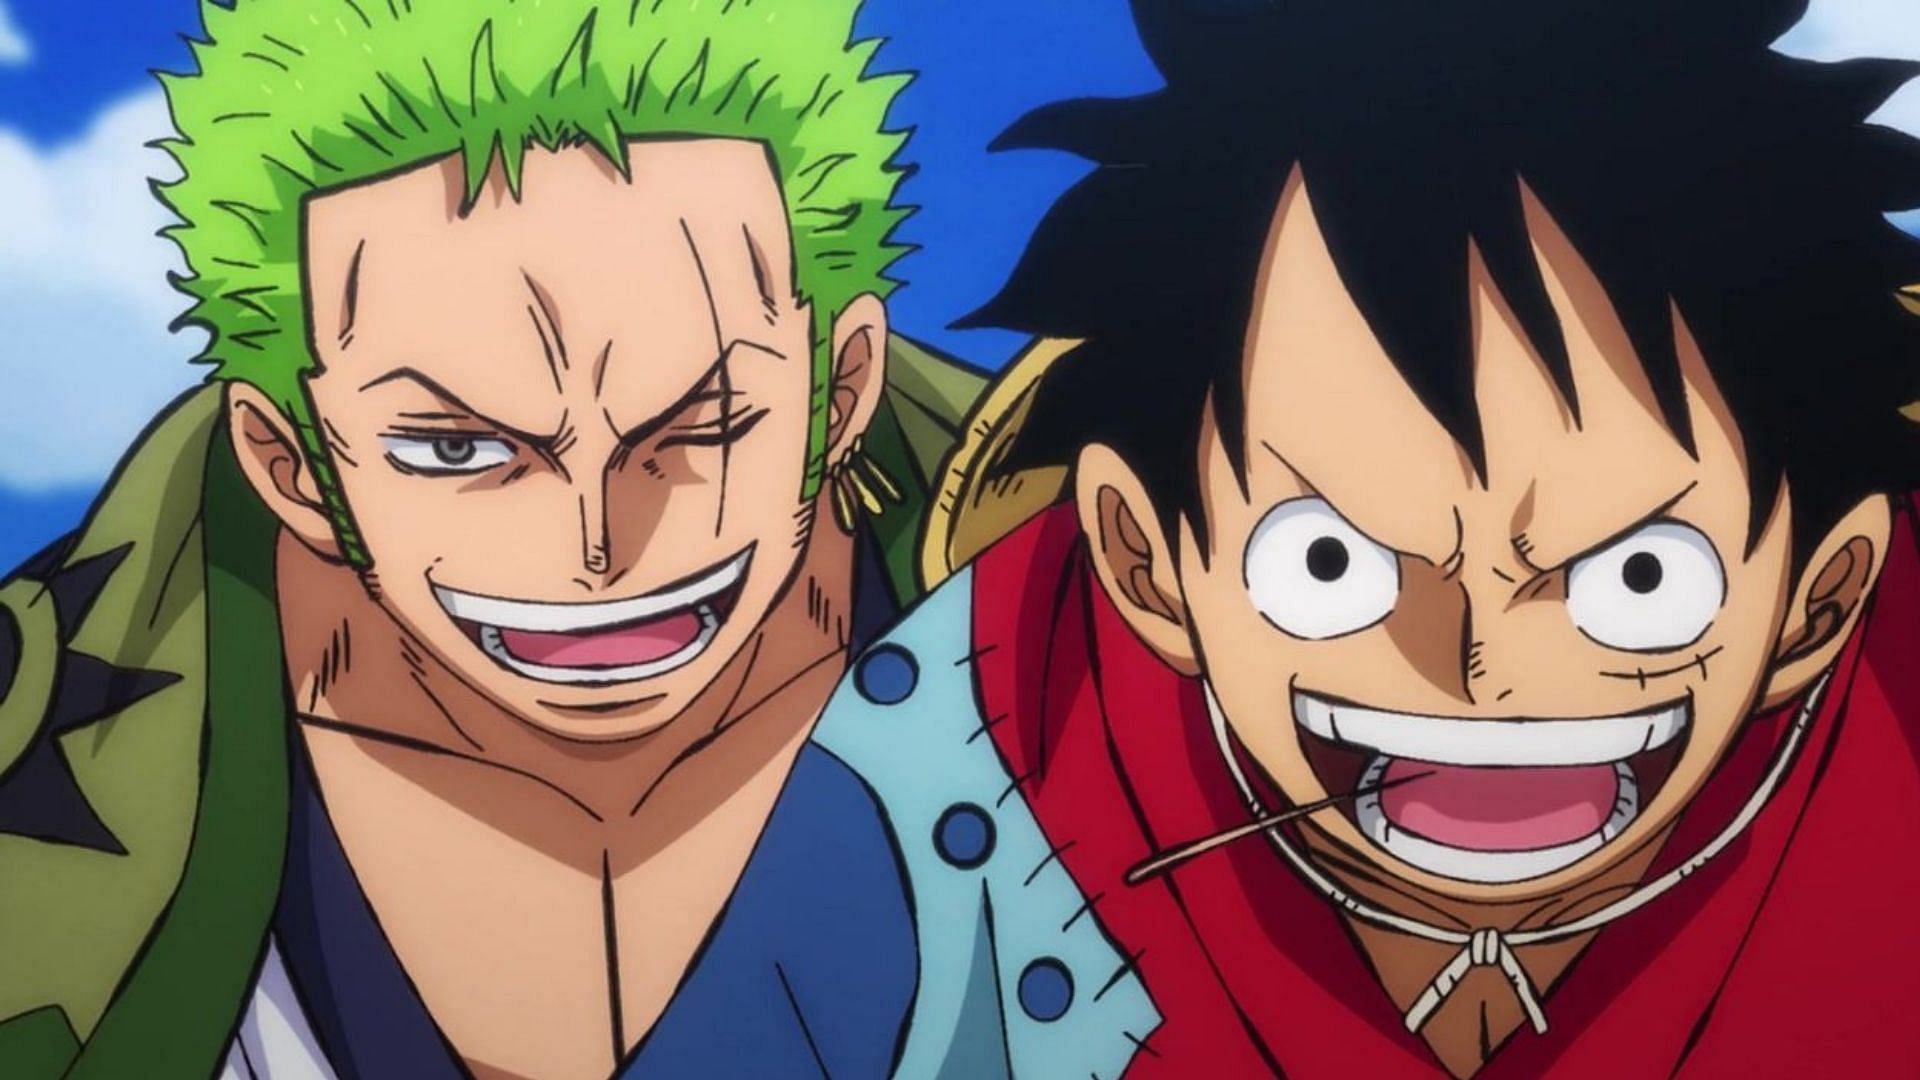 Fans seem set to witness the legendary duo meet for the first time in the first episode of the One Piece live-action series (Image via Toei Animation)